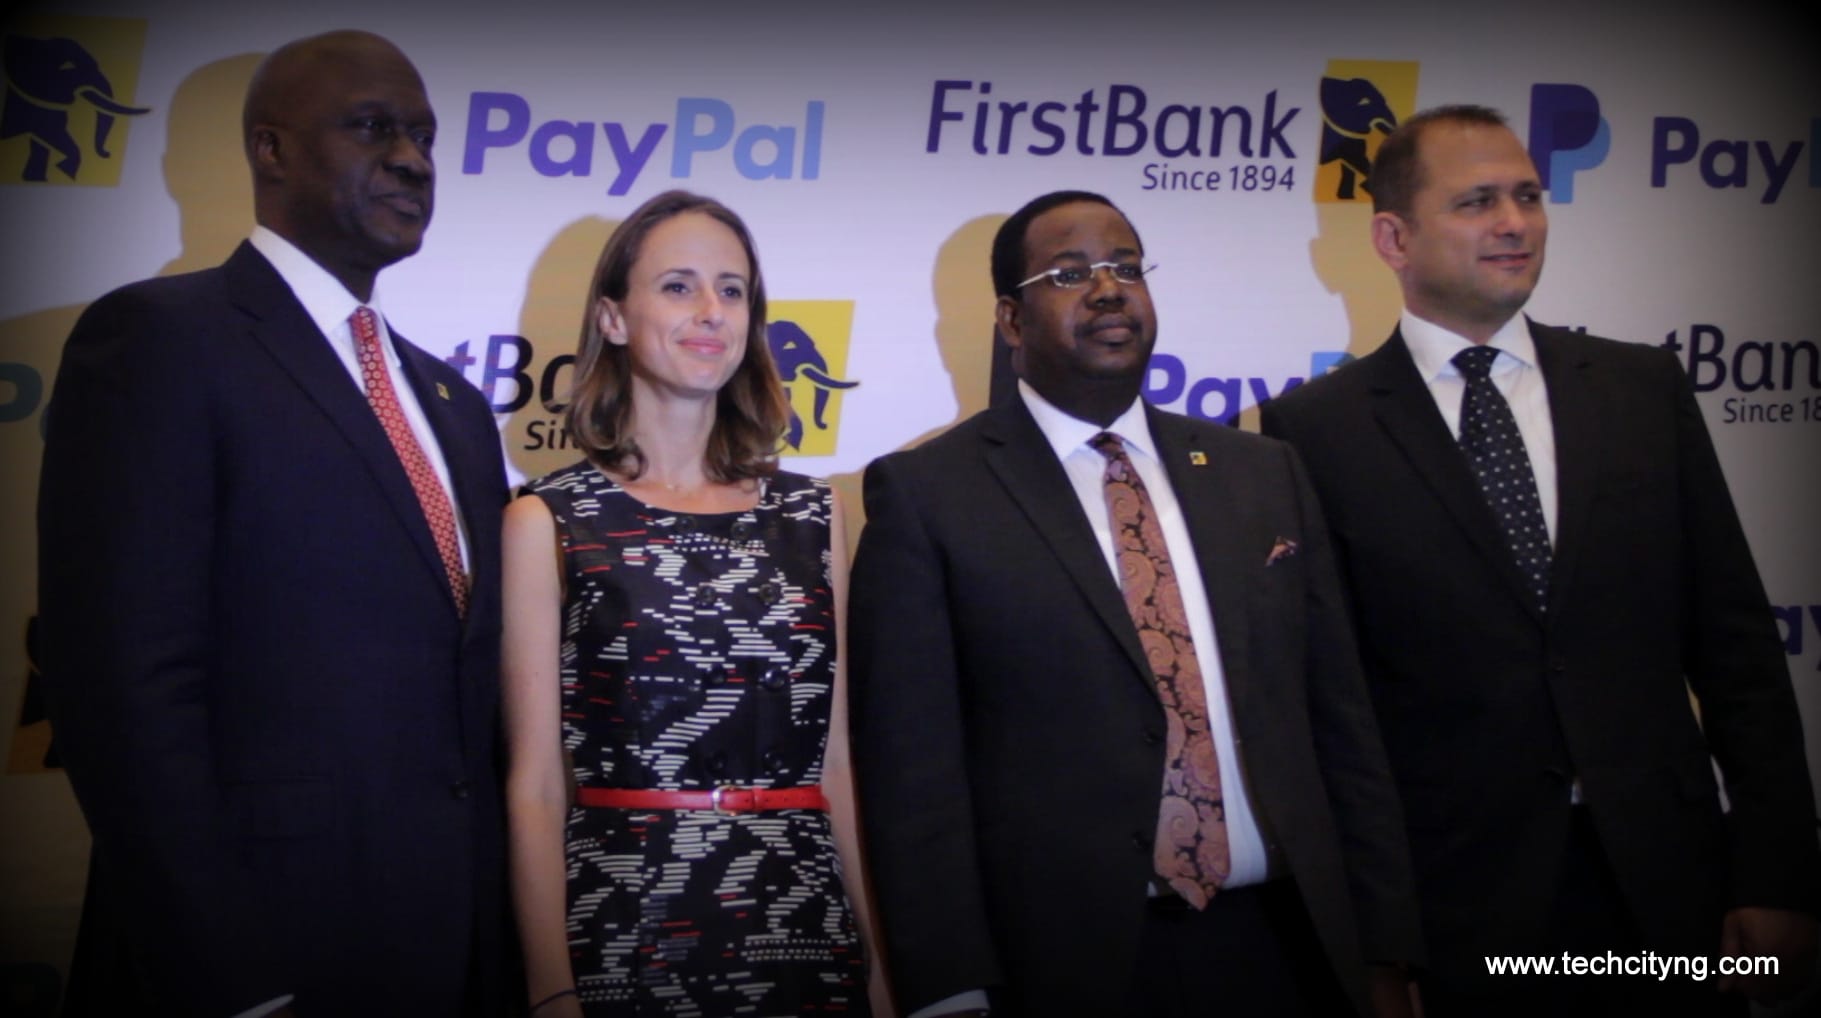 FirsstBank Paypal launch